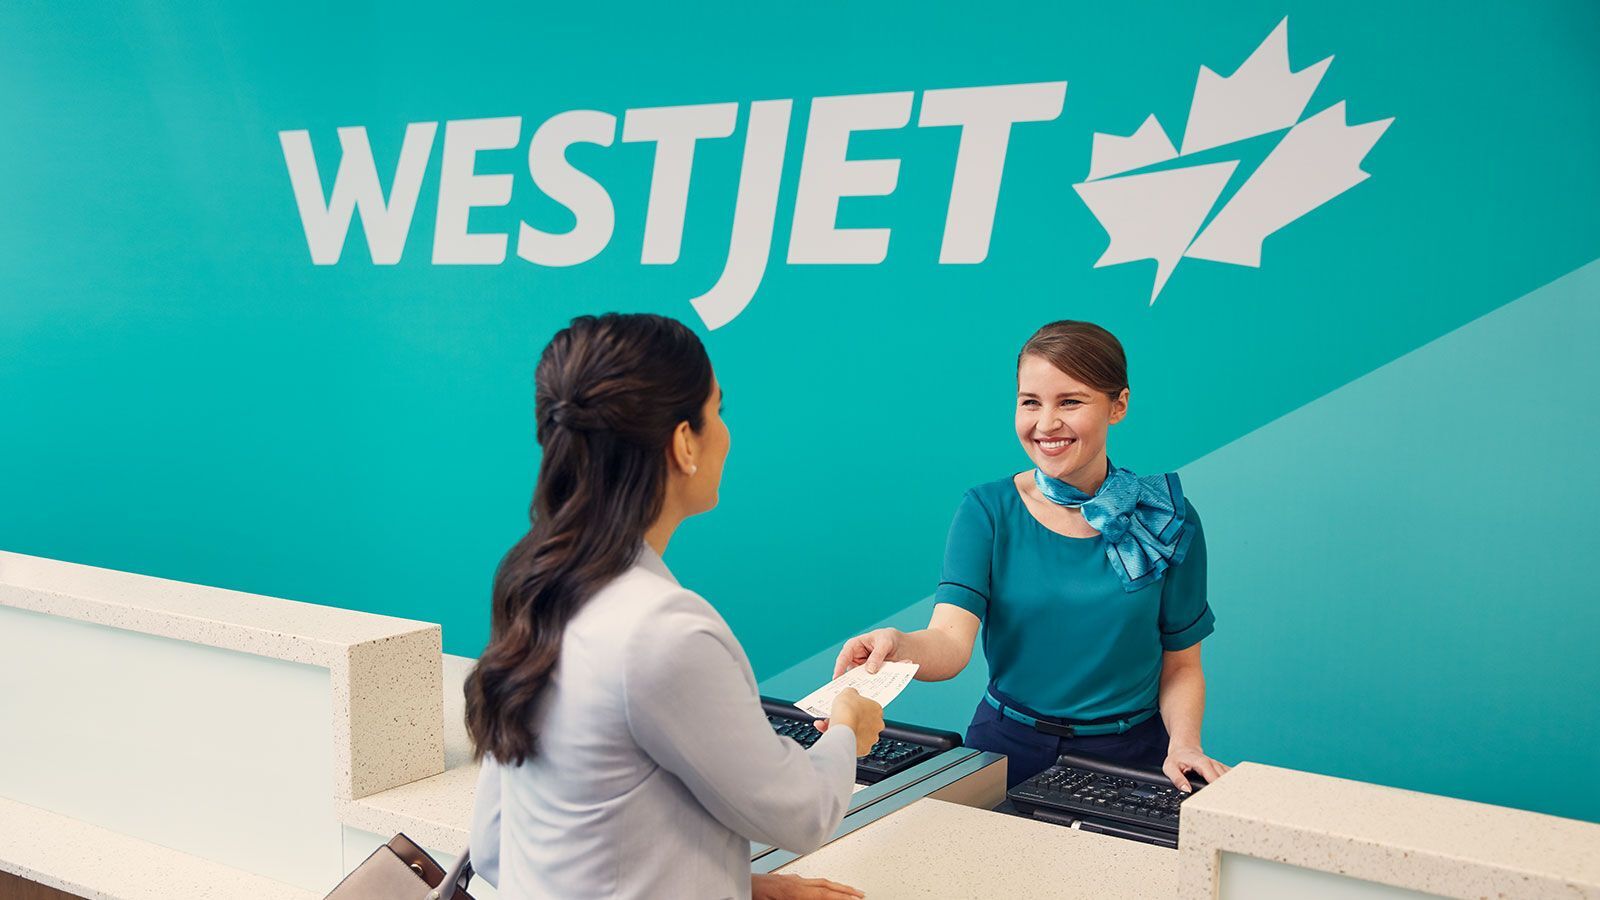 The airline WestJet is launching new flights from the UK to Canada